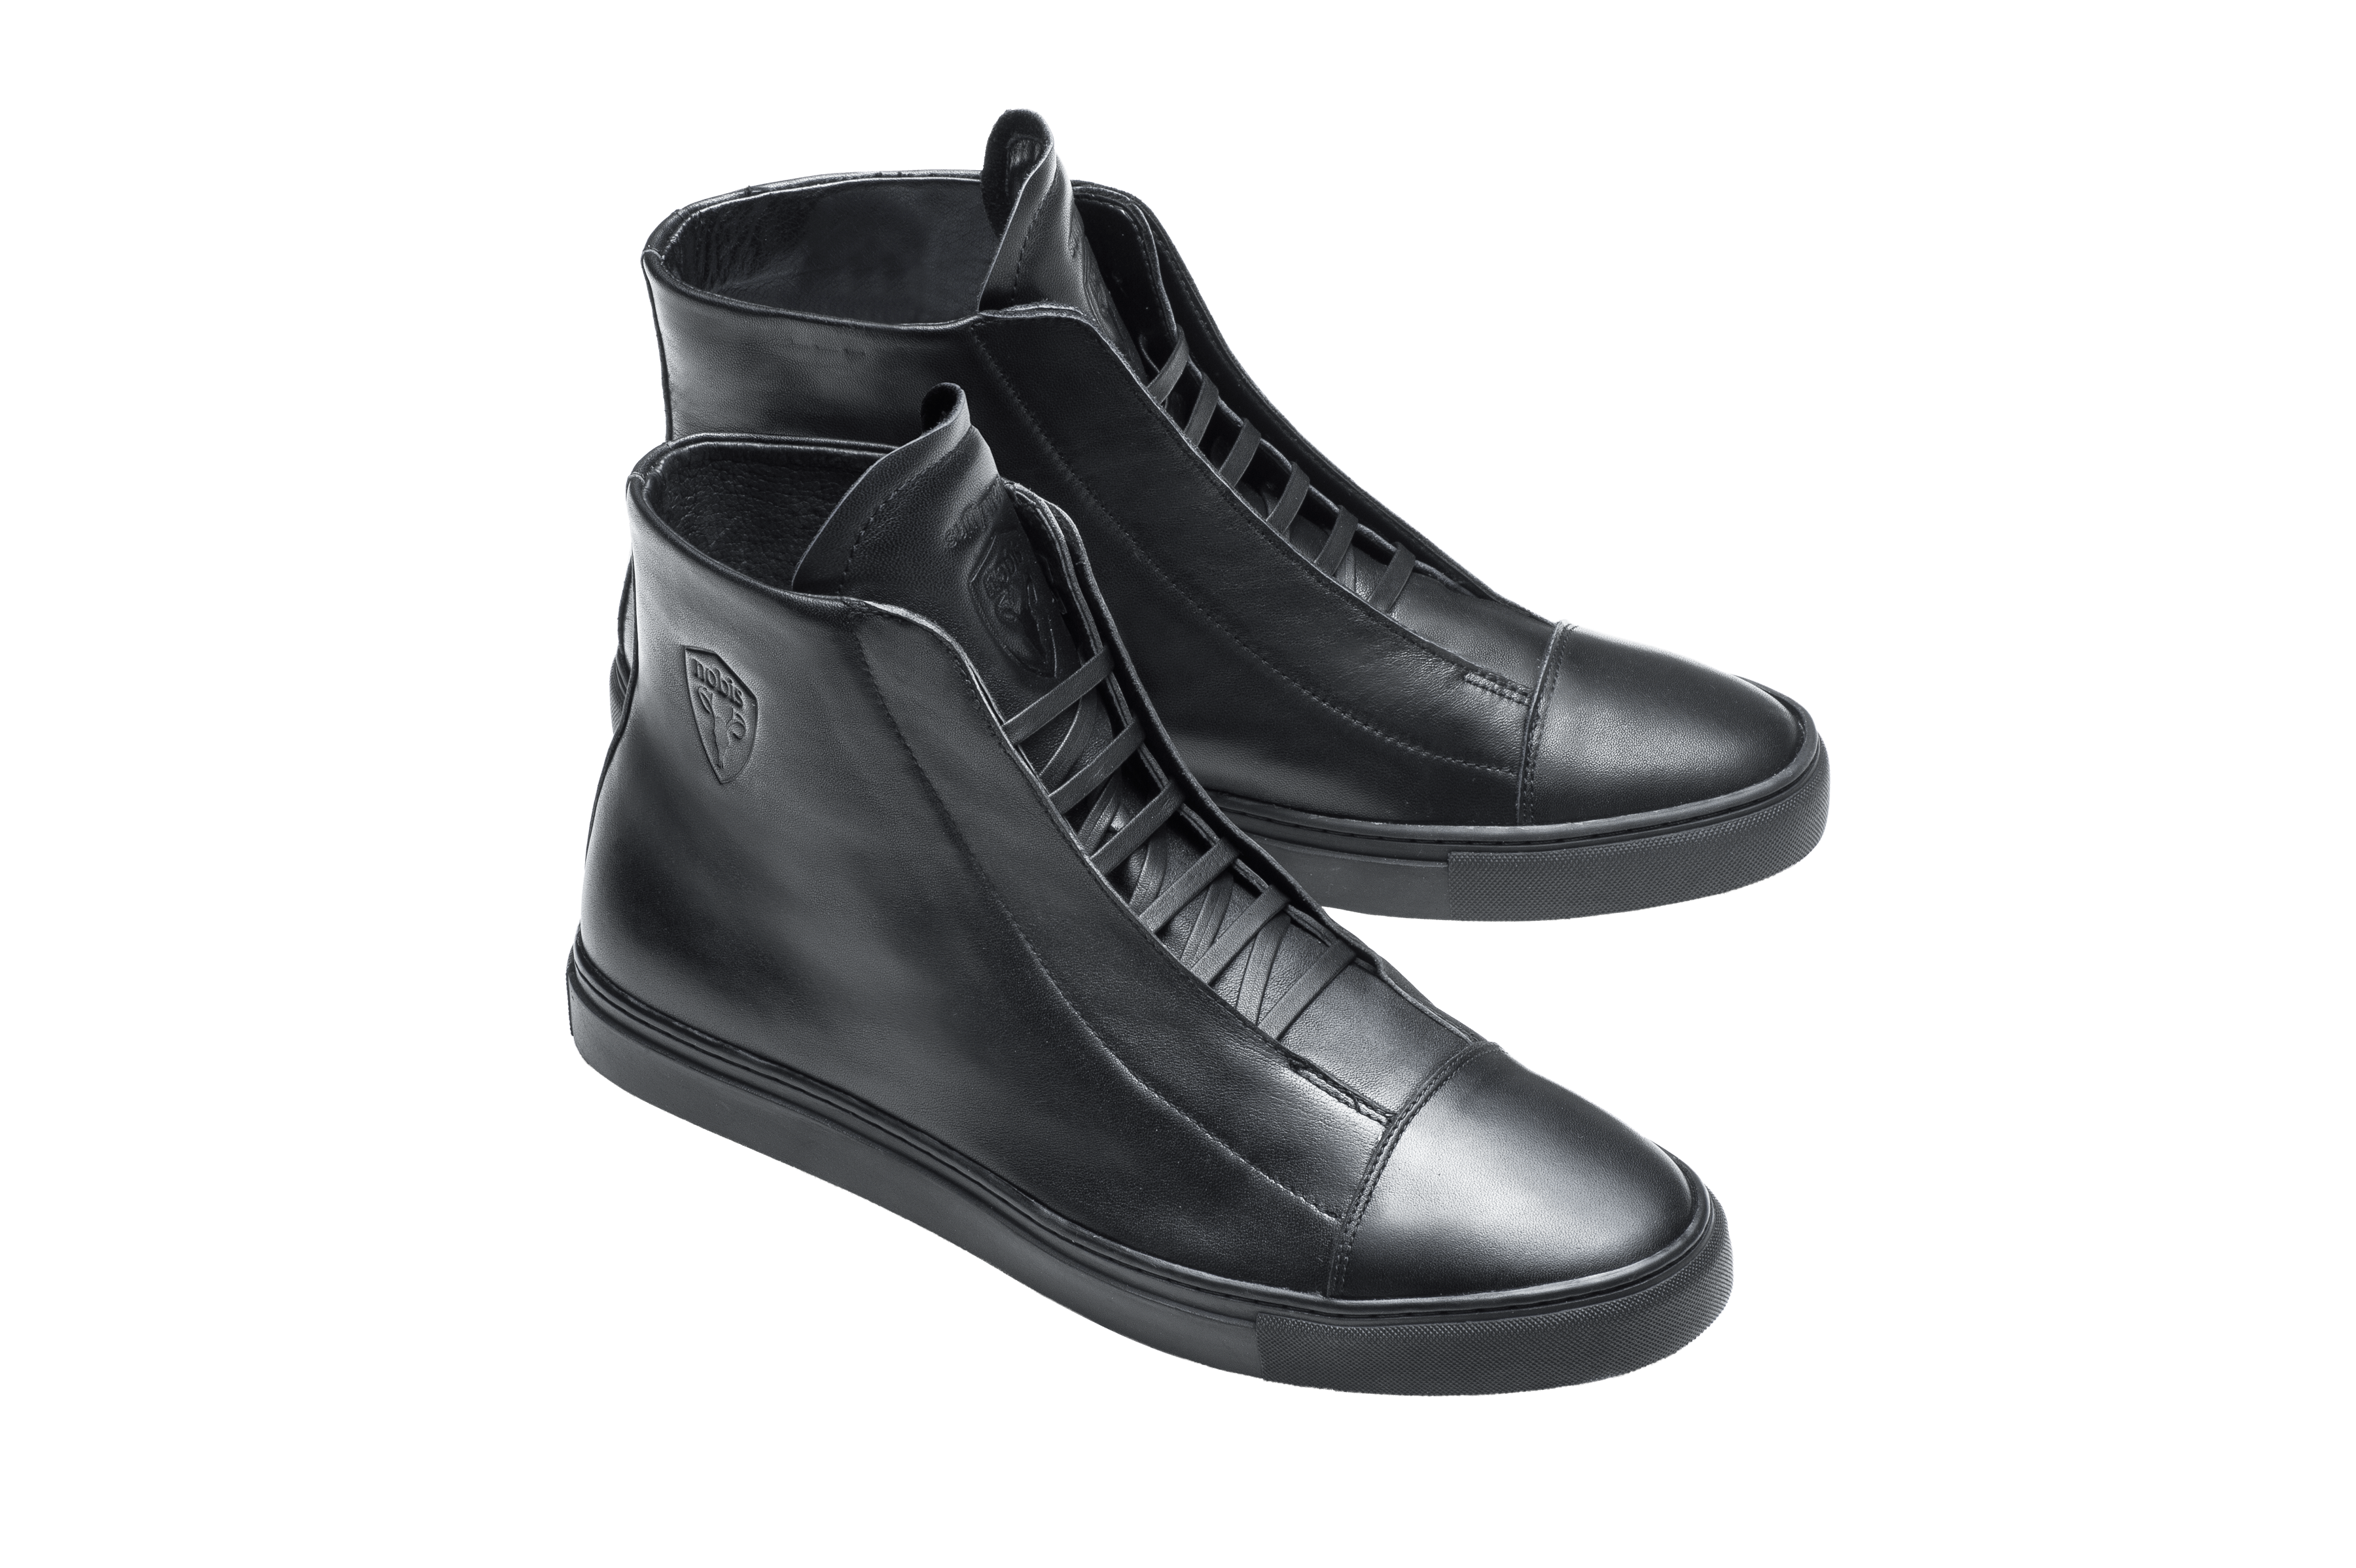 Sully Wong Black Leather Mid Top Sneaker